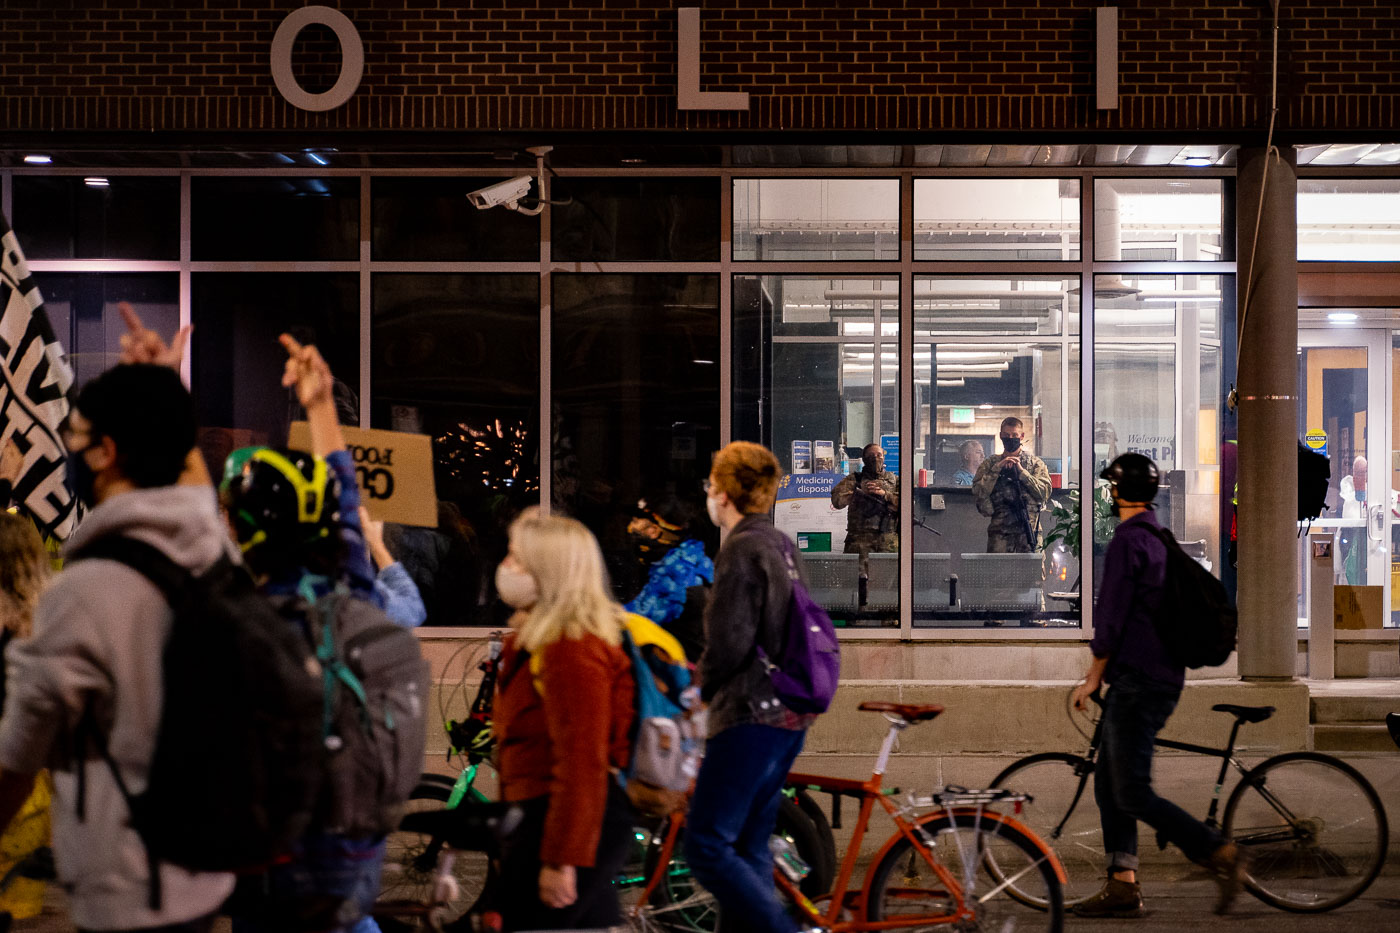 Protesters walk by the 1st precinct police station